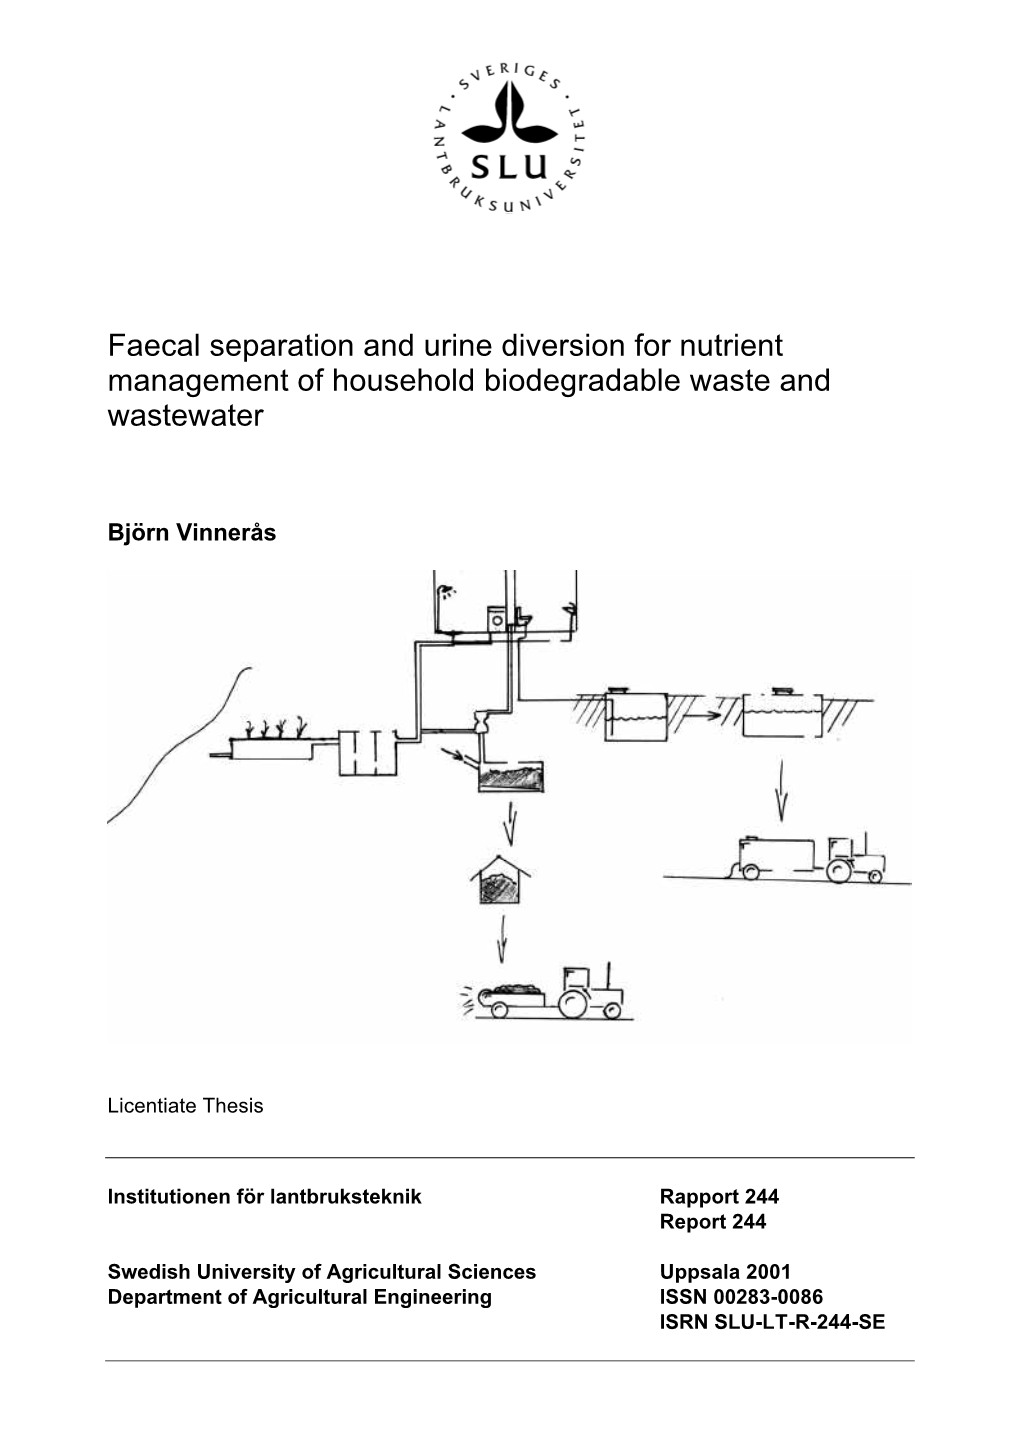 Faecal Separation and Urine Diversion for Nutrient Management of Household Biodegradable Waste and Wastewater